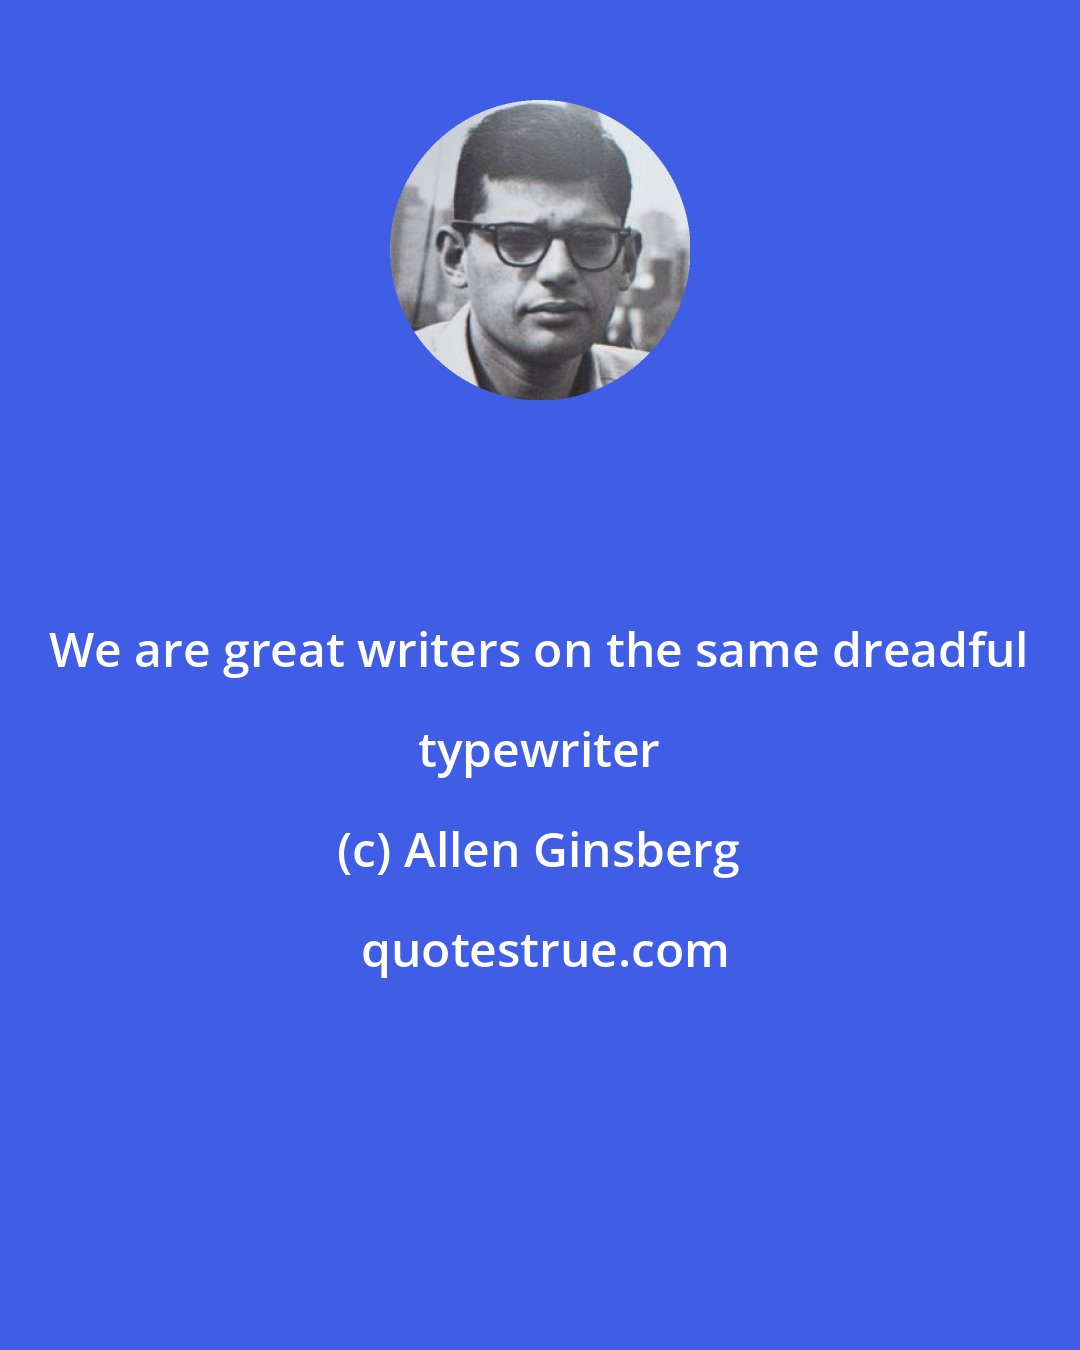 Allen Ginsberg: We are great writers on the same dreadful typewriter